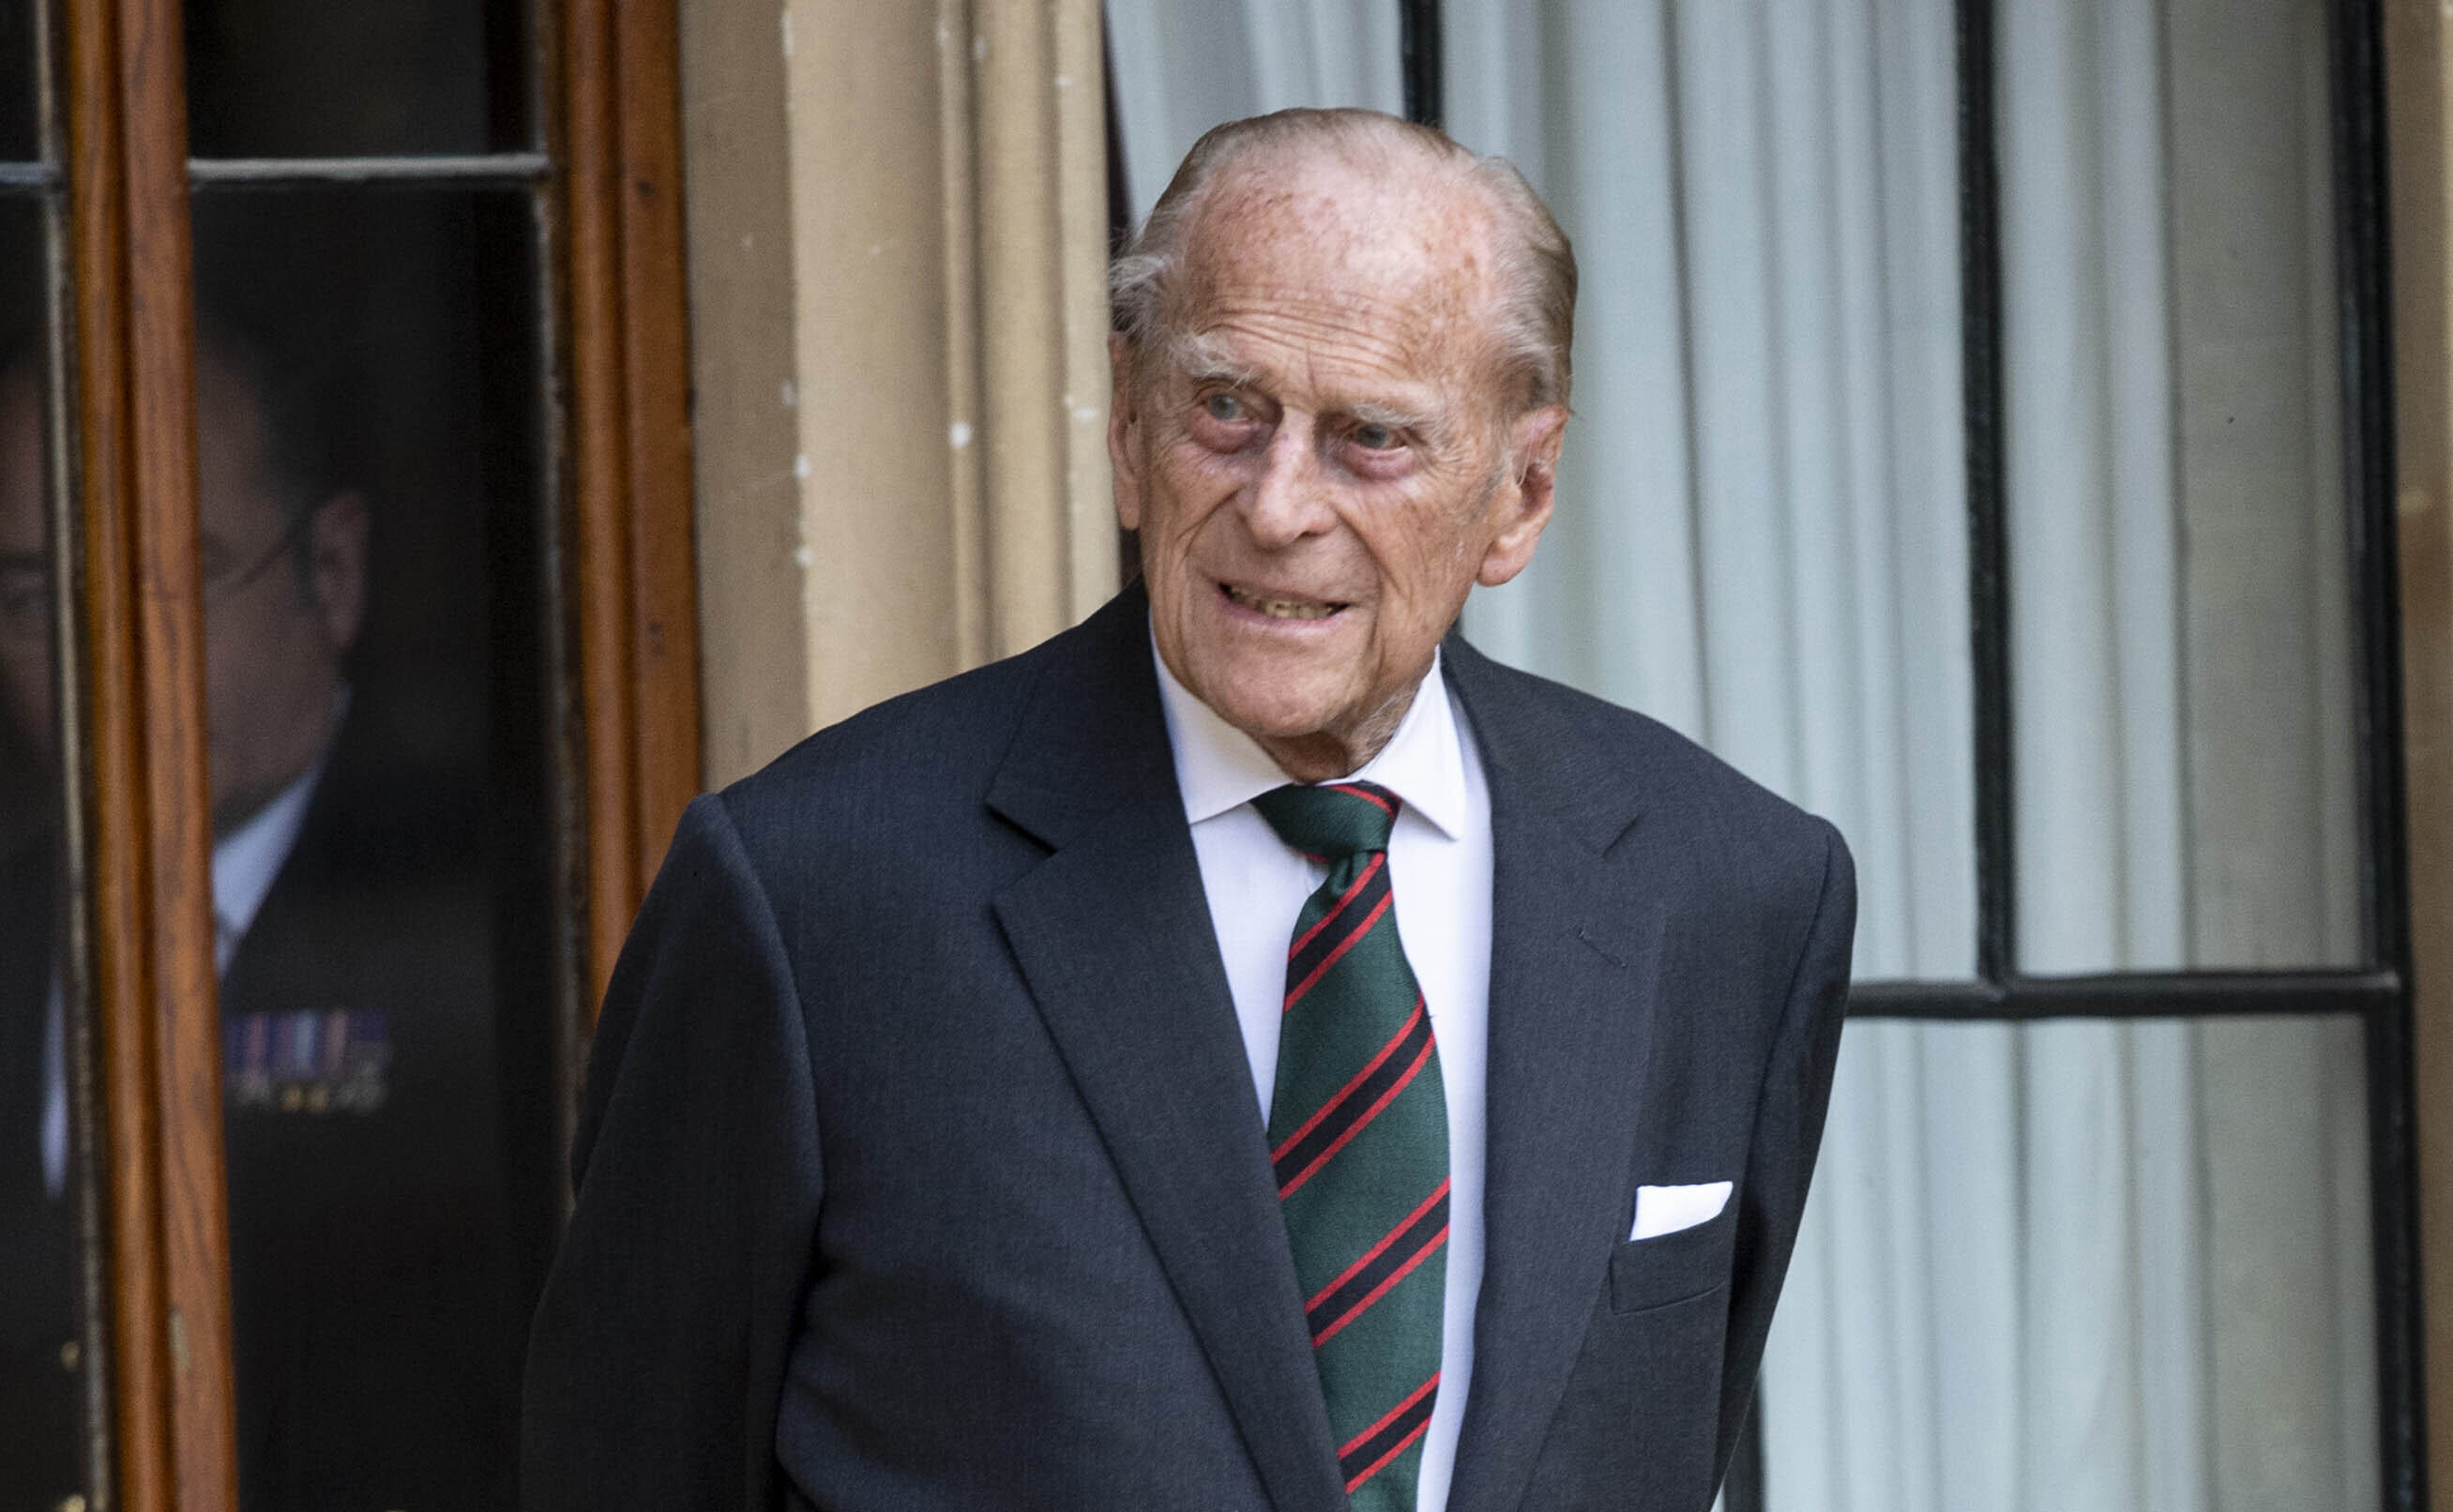 Photo by: KGC-178/STAR MAX/IPx 2020 7/22/20 Prince Philip, Duke of Edinburgh during the transfer of the Colonel-in-Chief of The Rifles at Windsor Castle.